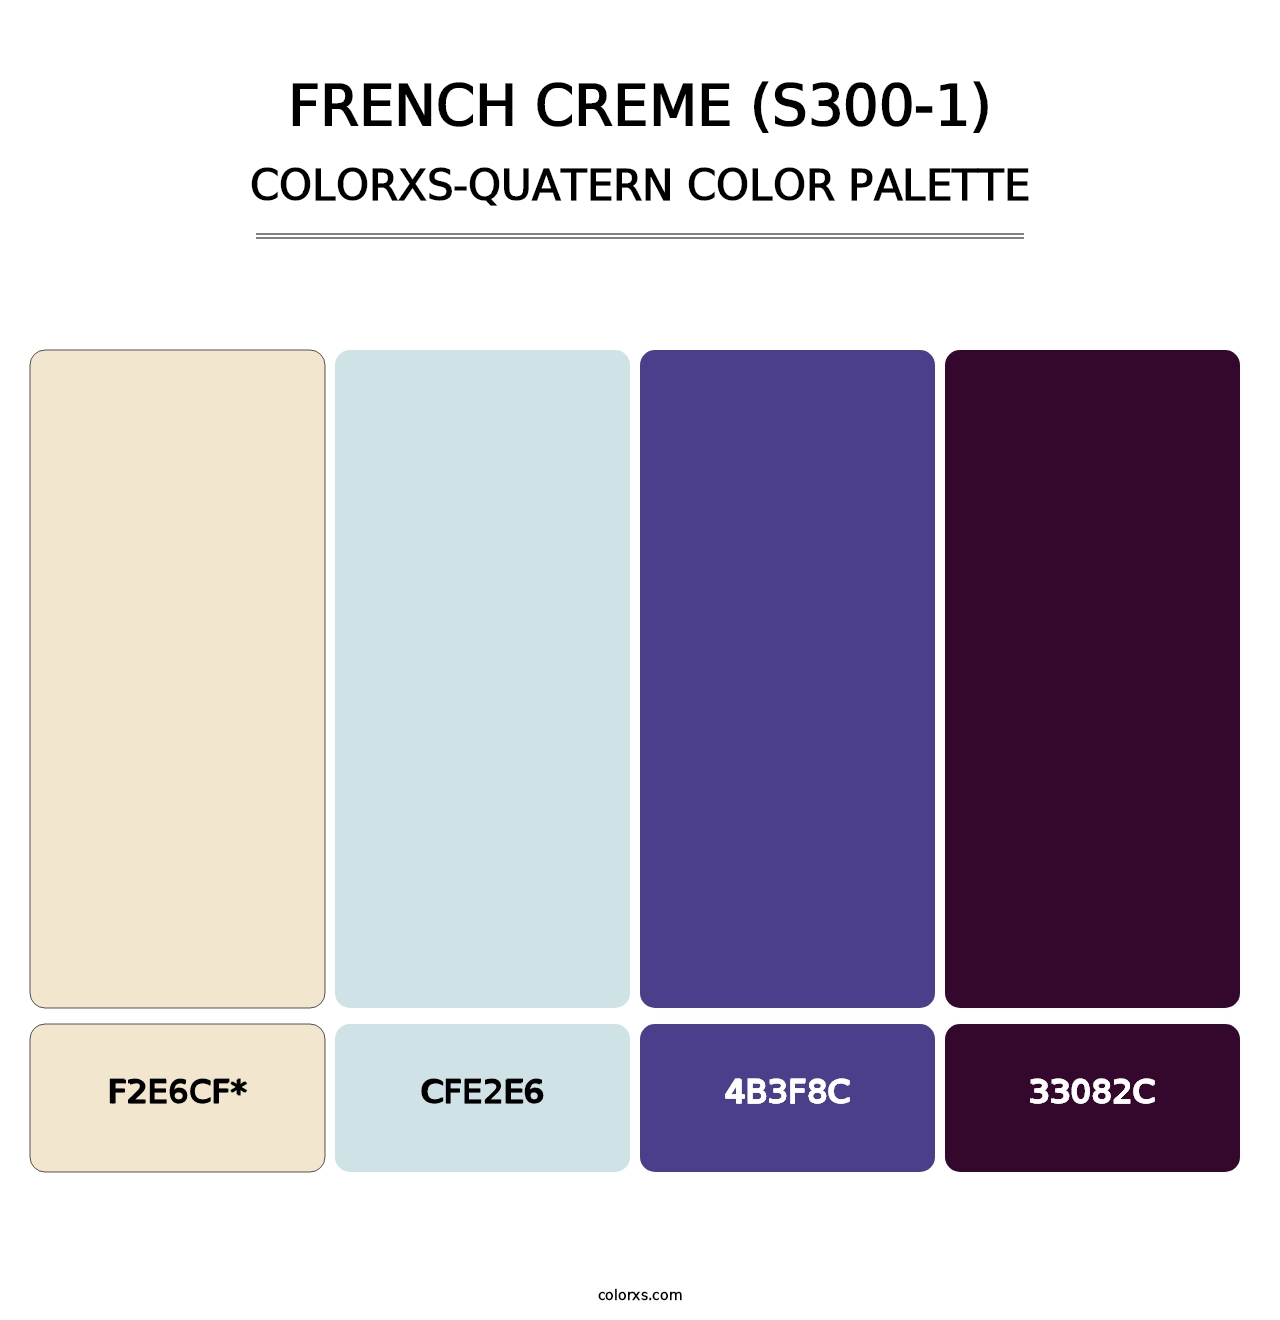 French Creme (S300-1) - Colorxs Quatern Palette